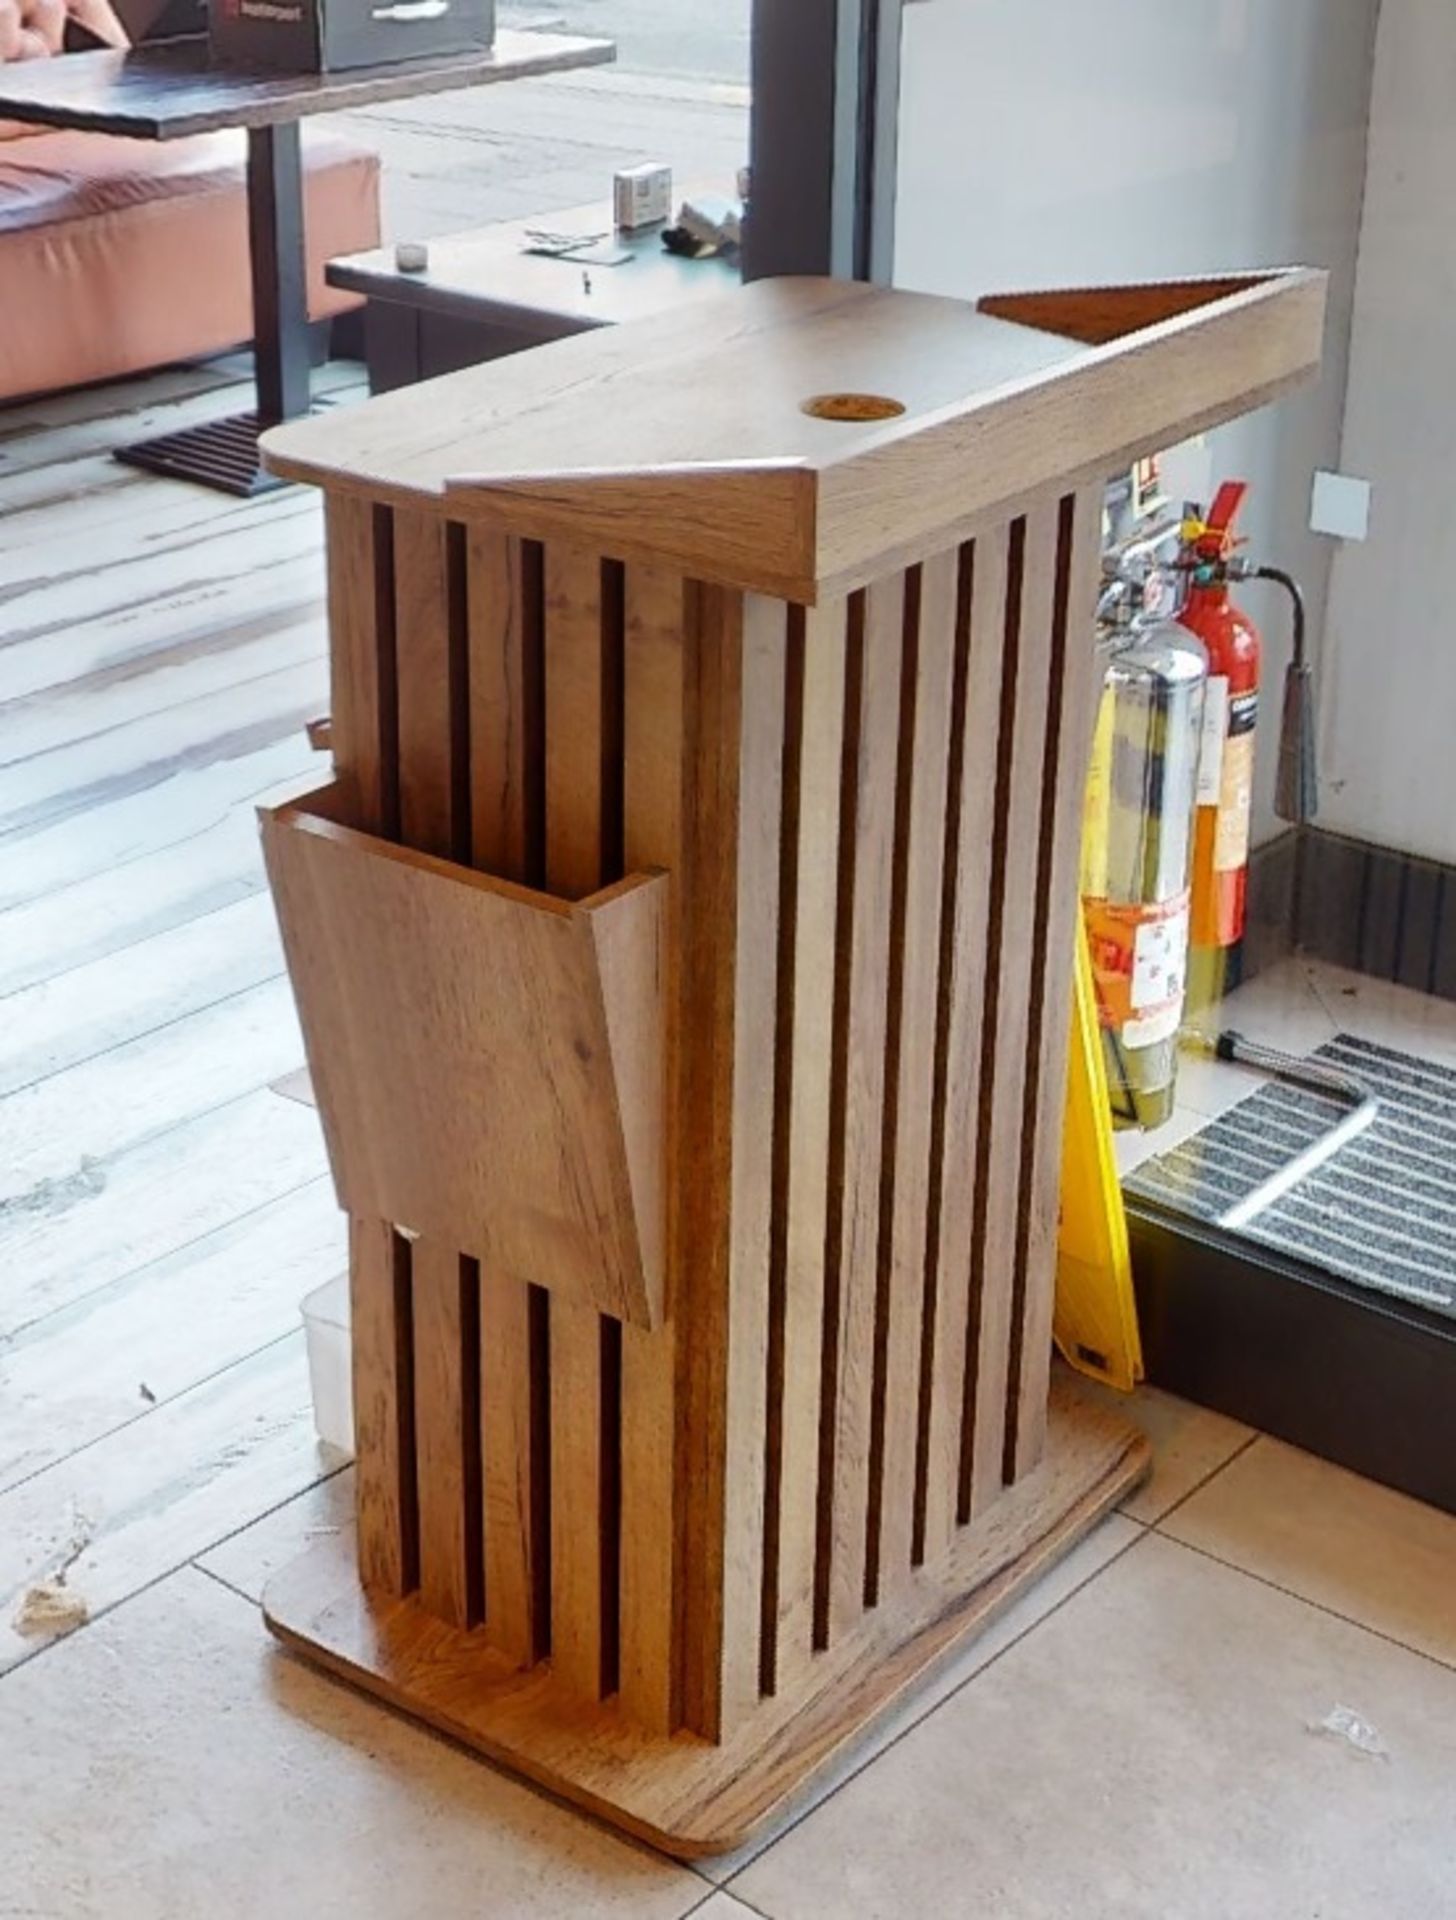 1 x Meet and Greet Restaurant Podium in Oak With Menu Holder - Image 2 of 5